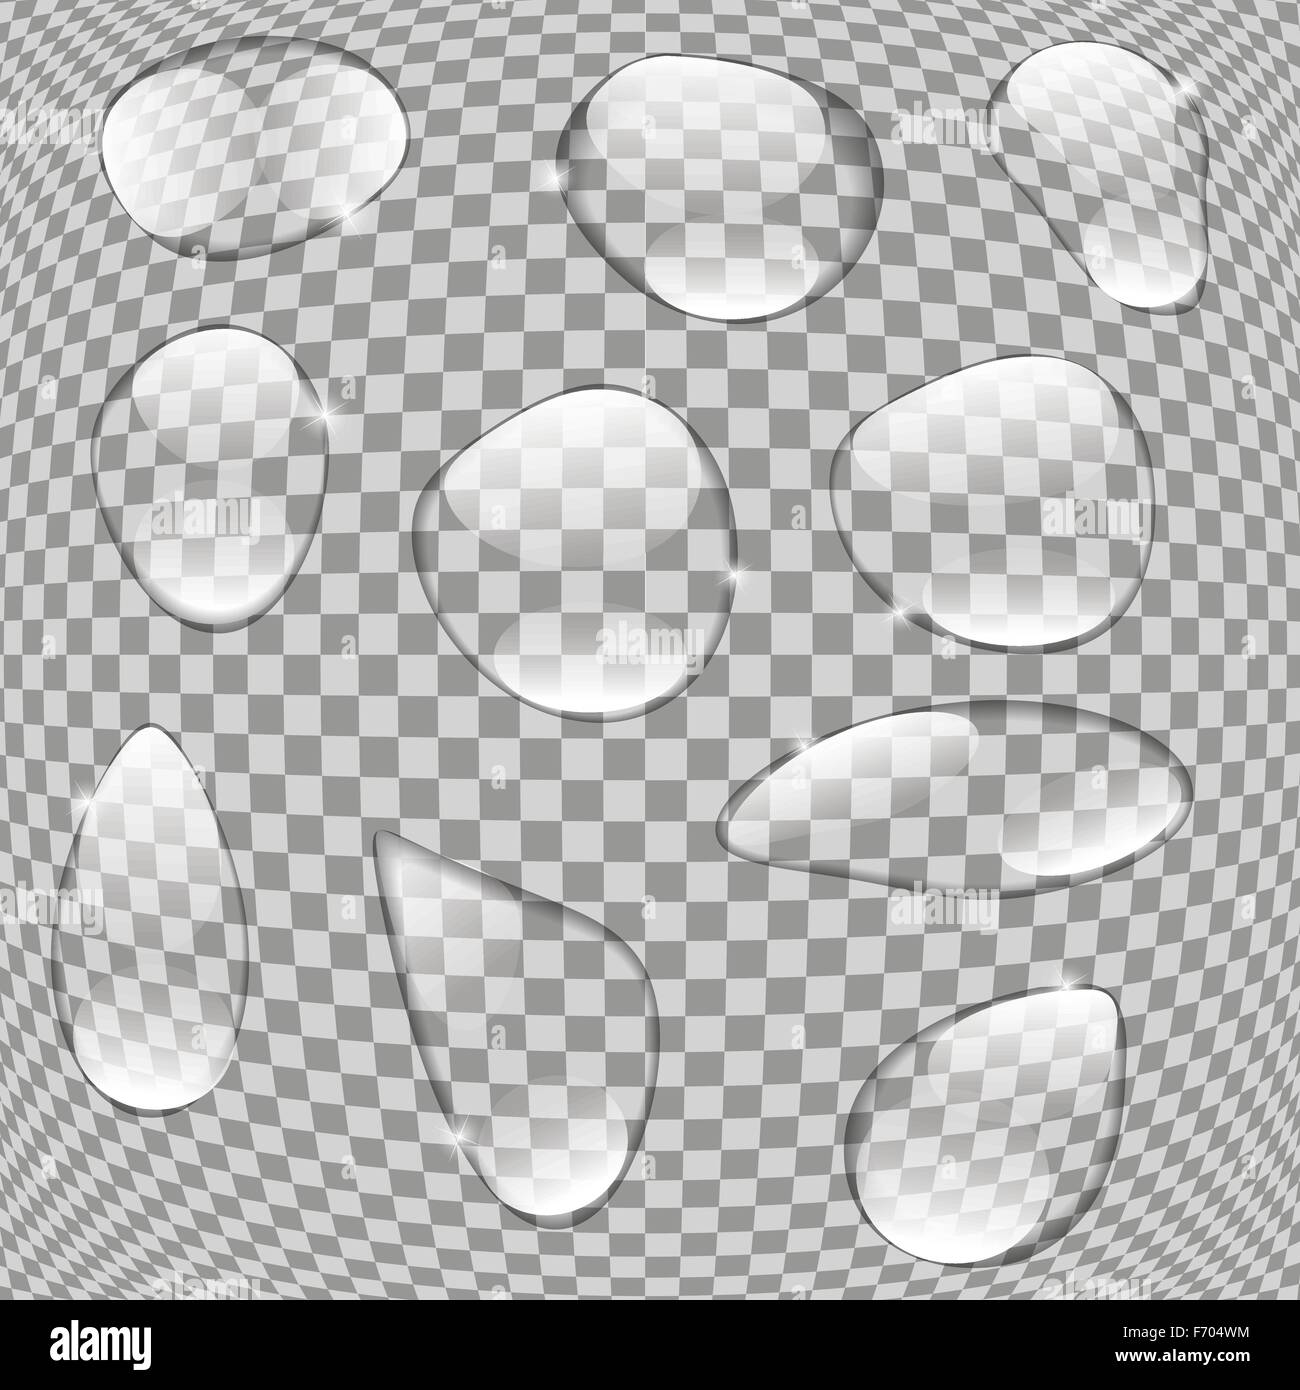 Realistic Water Drops Set On Transparent Background Vector Illus Stock Vector